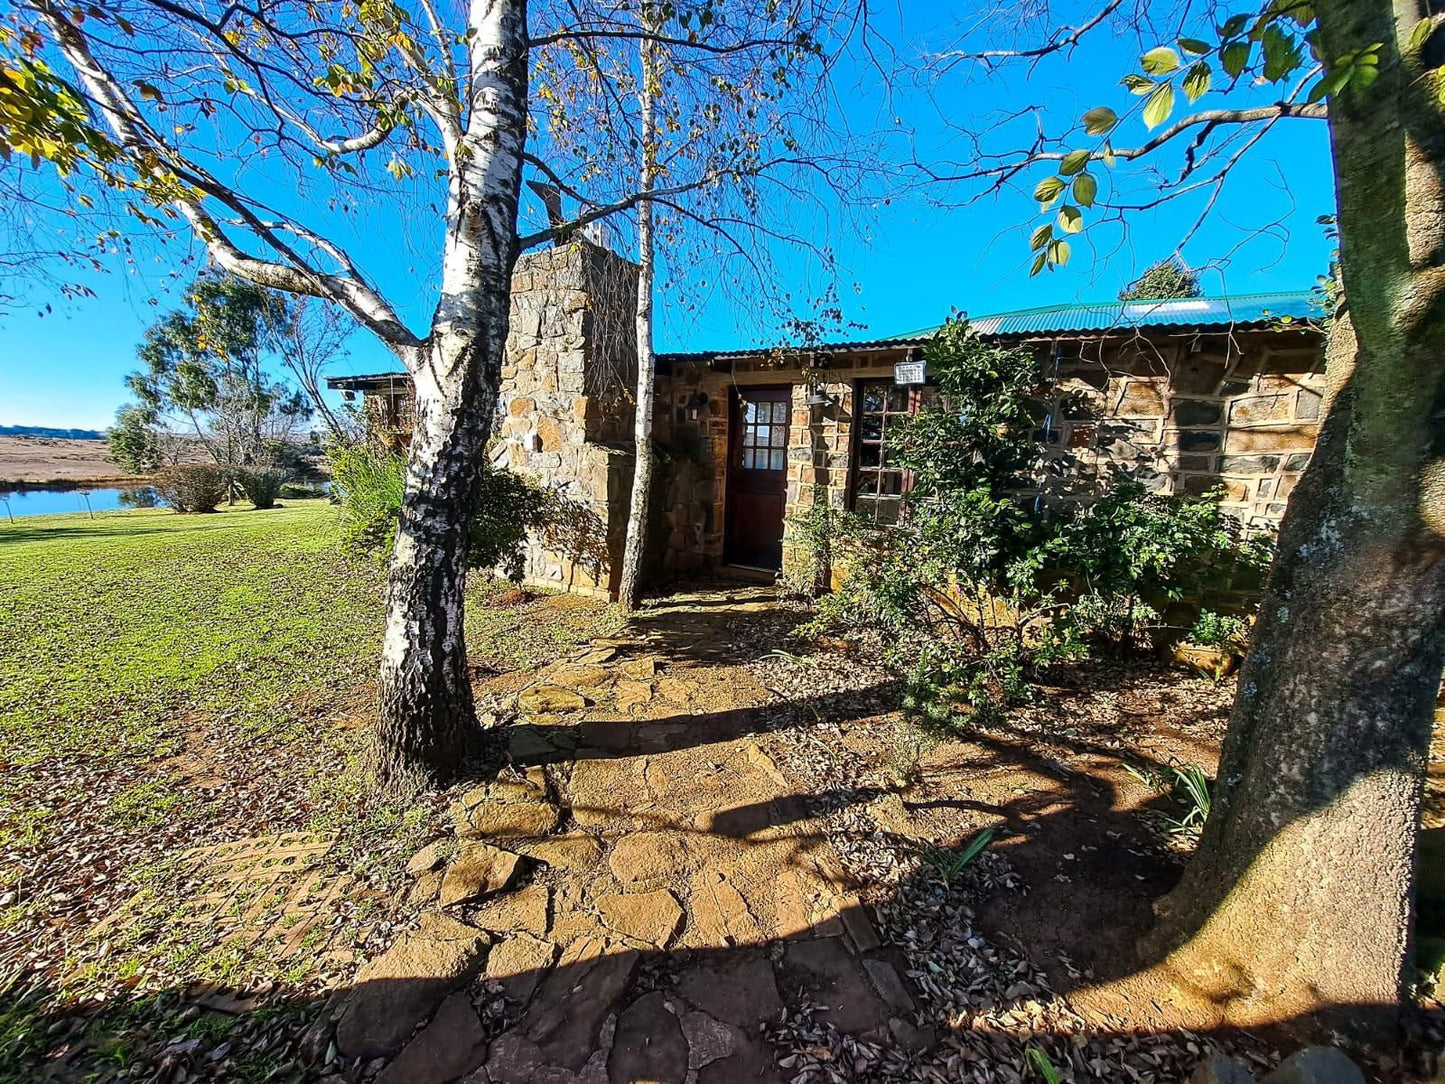 Dullstroom Manor Dullstroom Mpumalanga South Africa Complementary Colors, Cabin, Building, Architecture, Framing